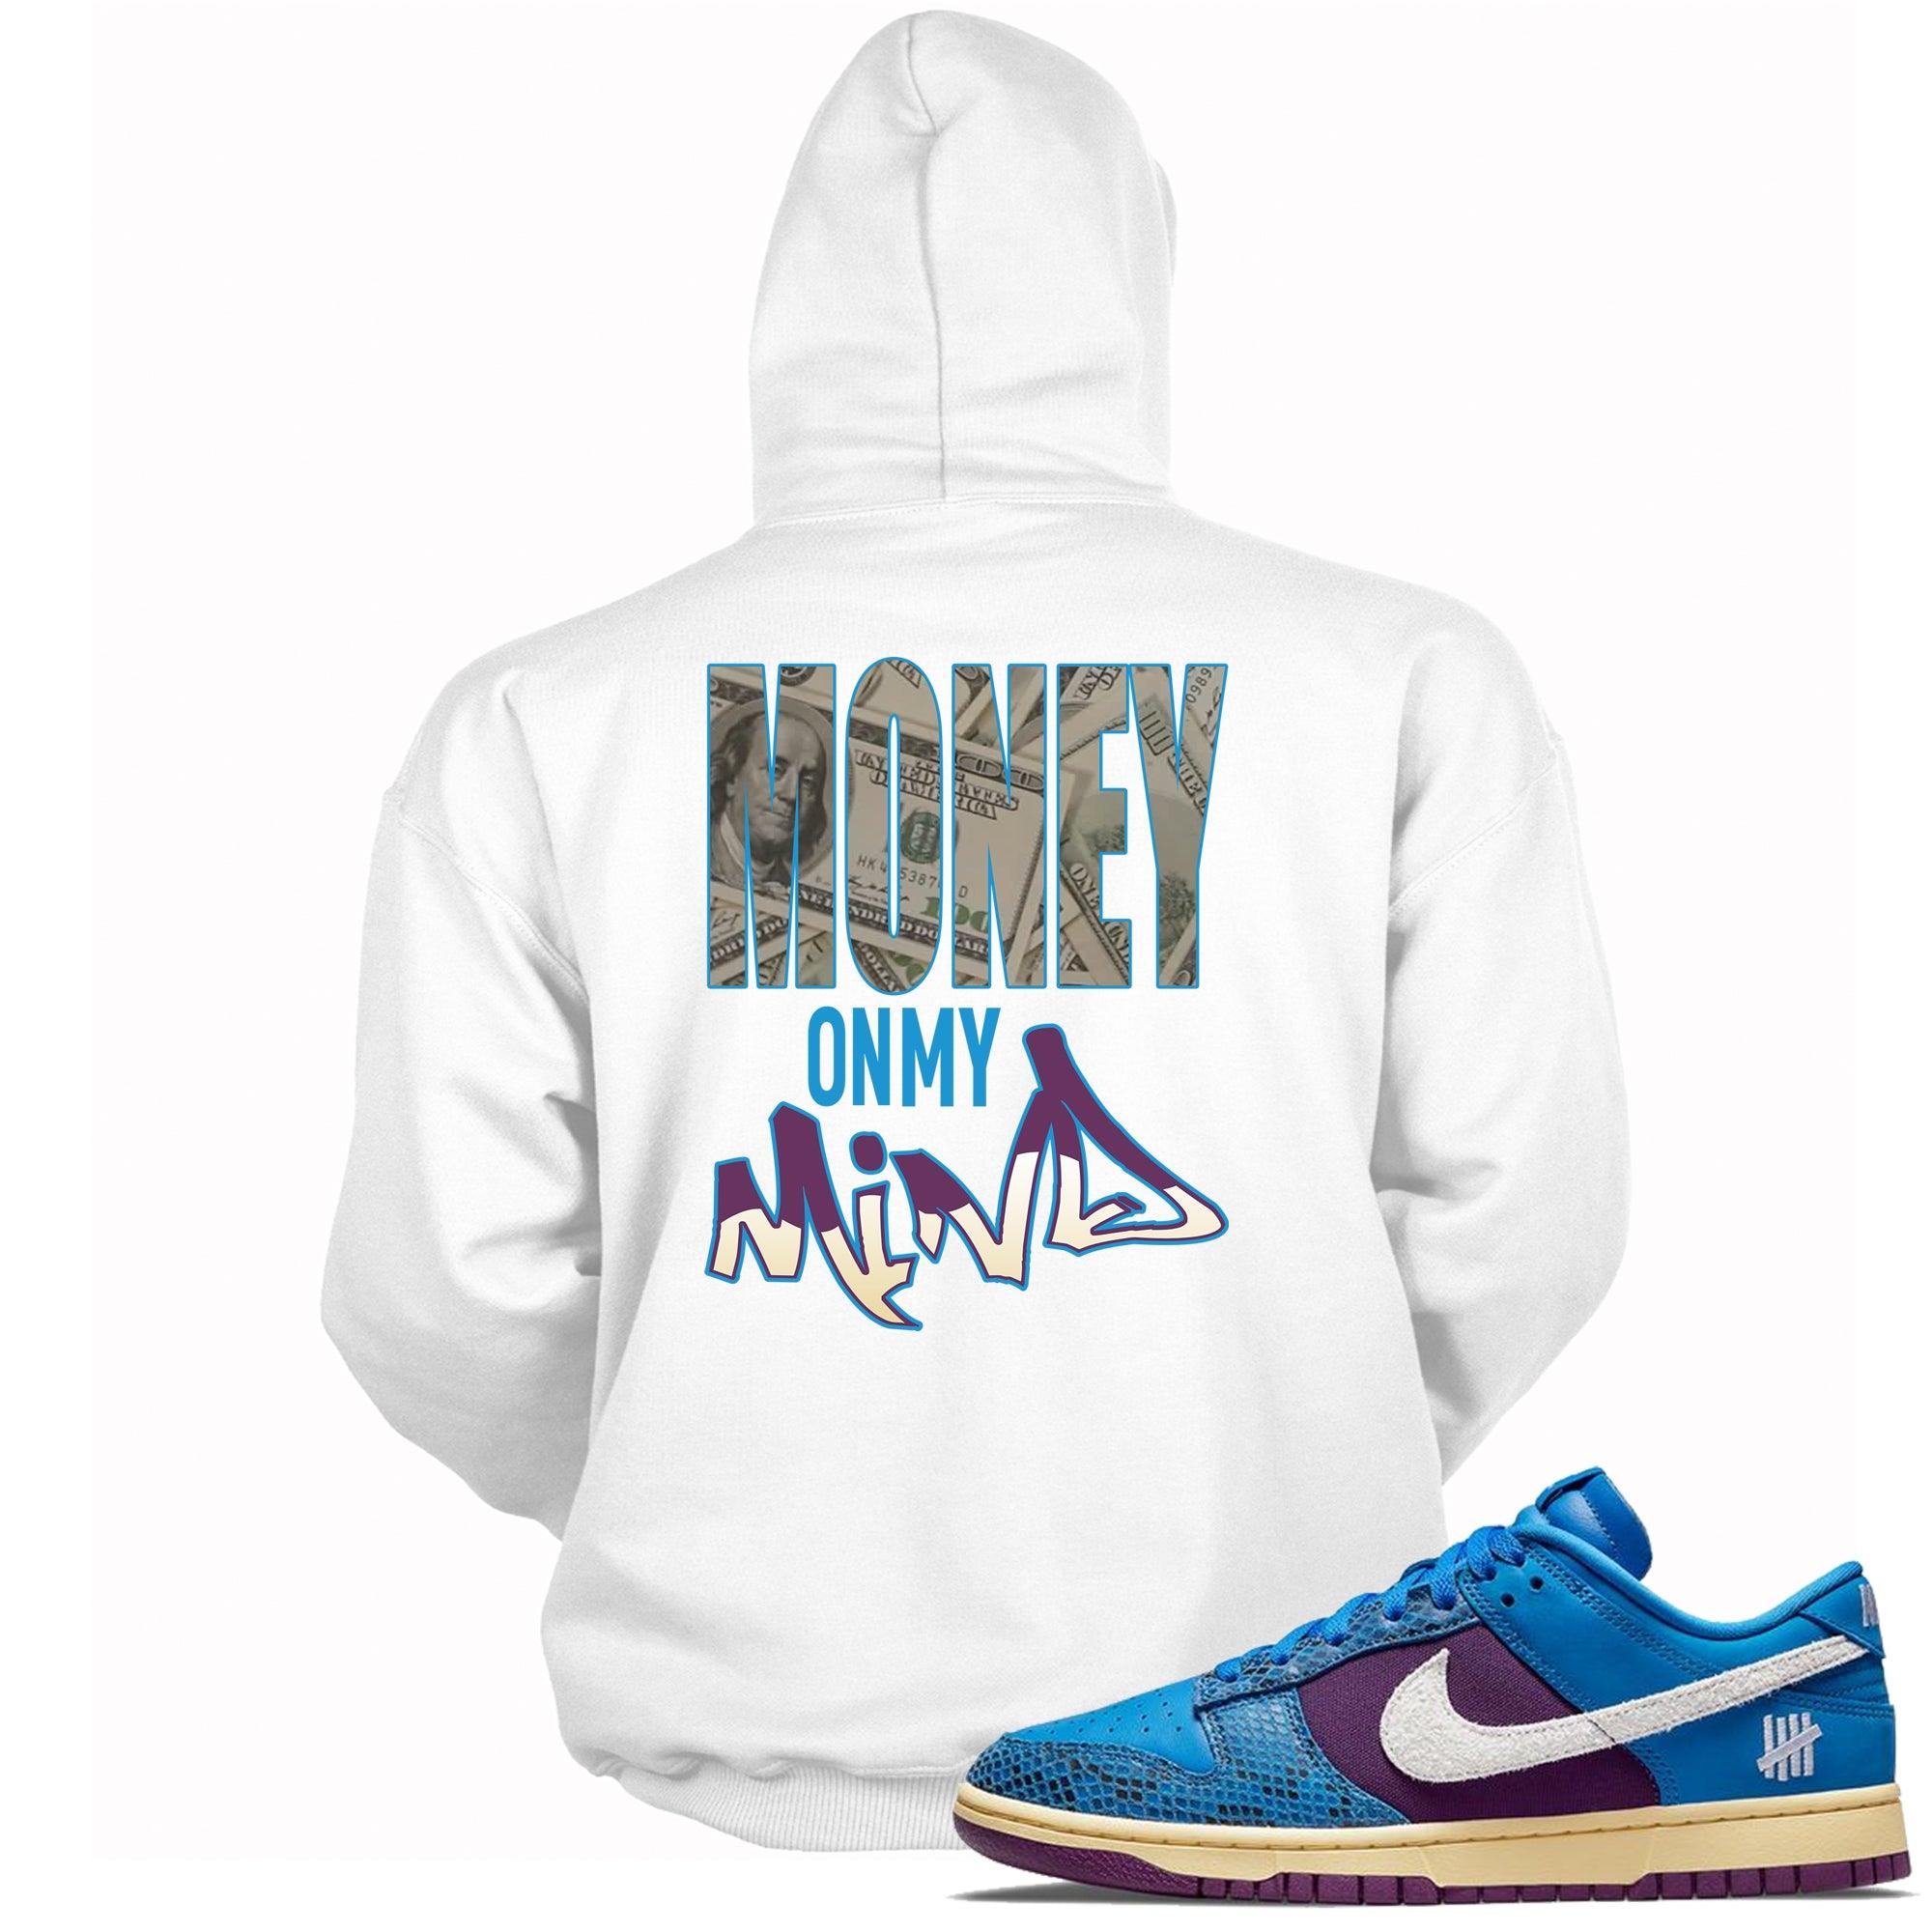 Money On My Mind Hoodie Nike Dunk Low Undefeated 5 On It Dunk vs AF1 photo